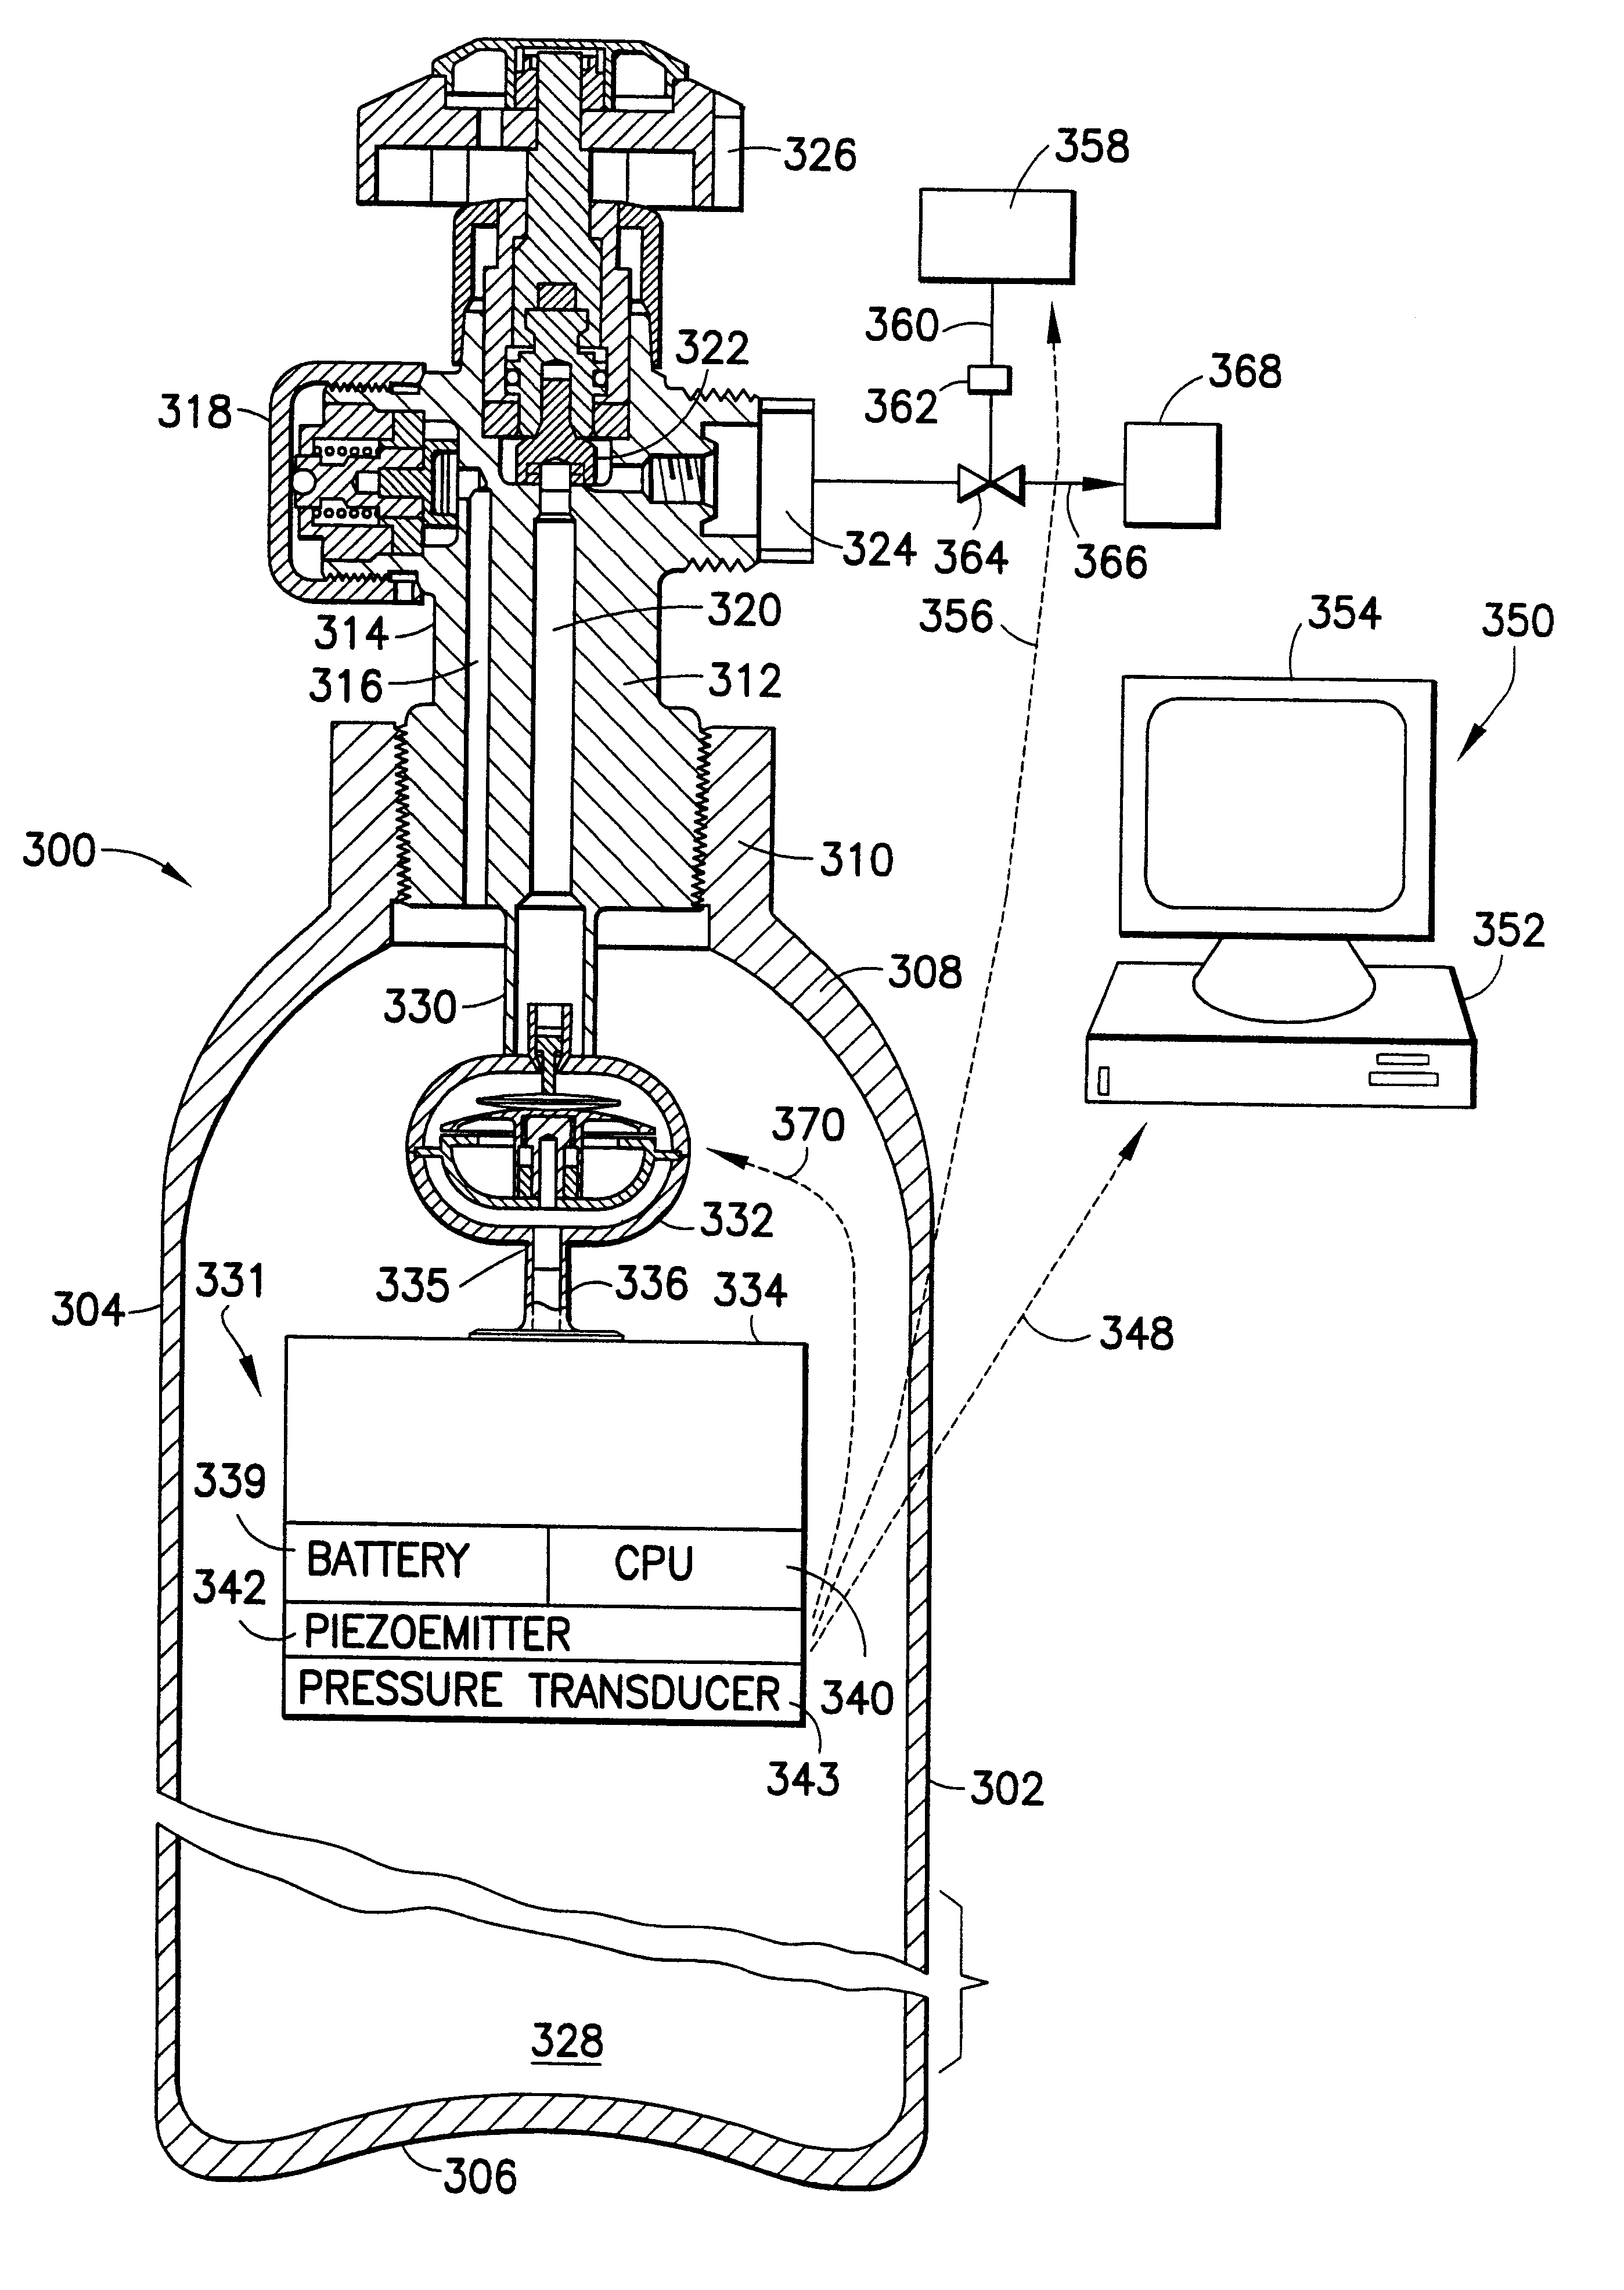 Fluid storage and dispensing system featuring externally adjustable regulator assembly for high flow dispensing